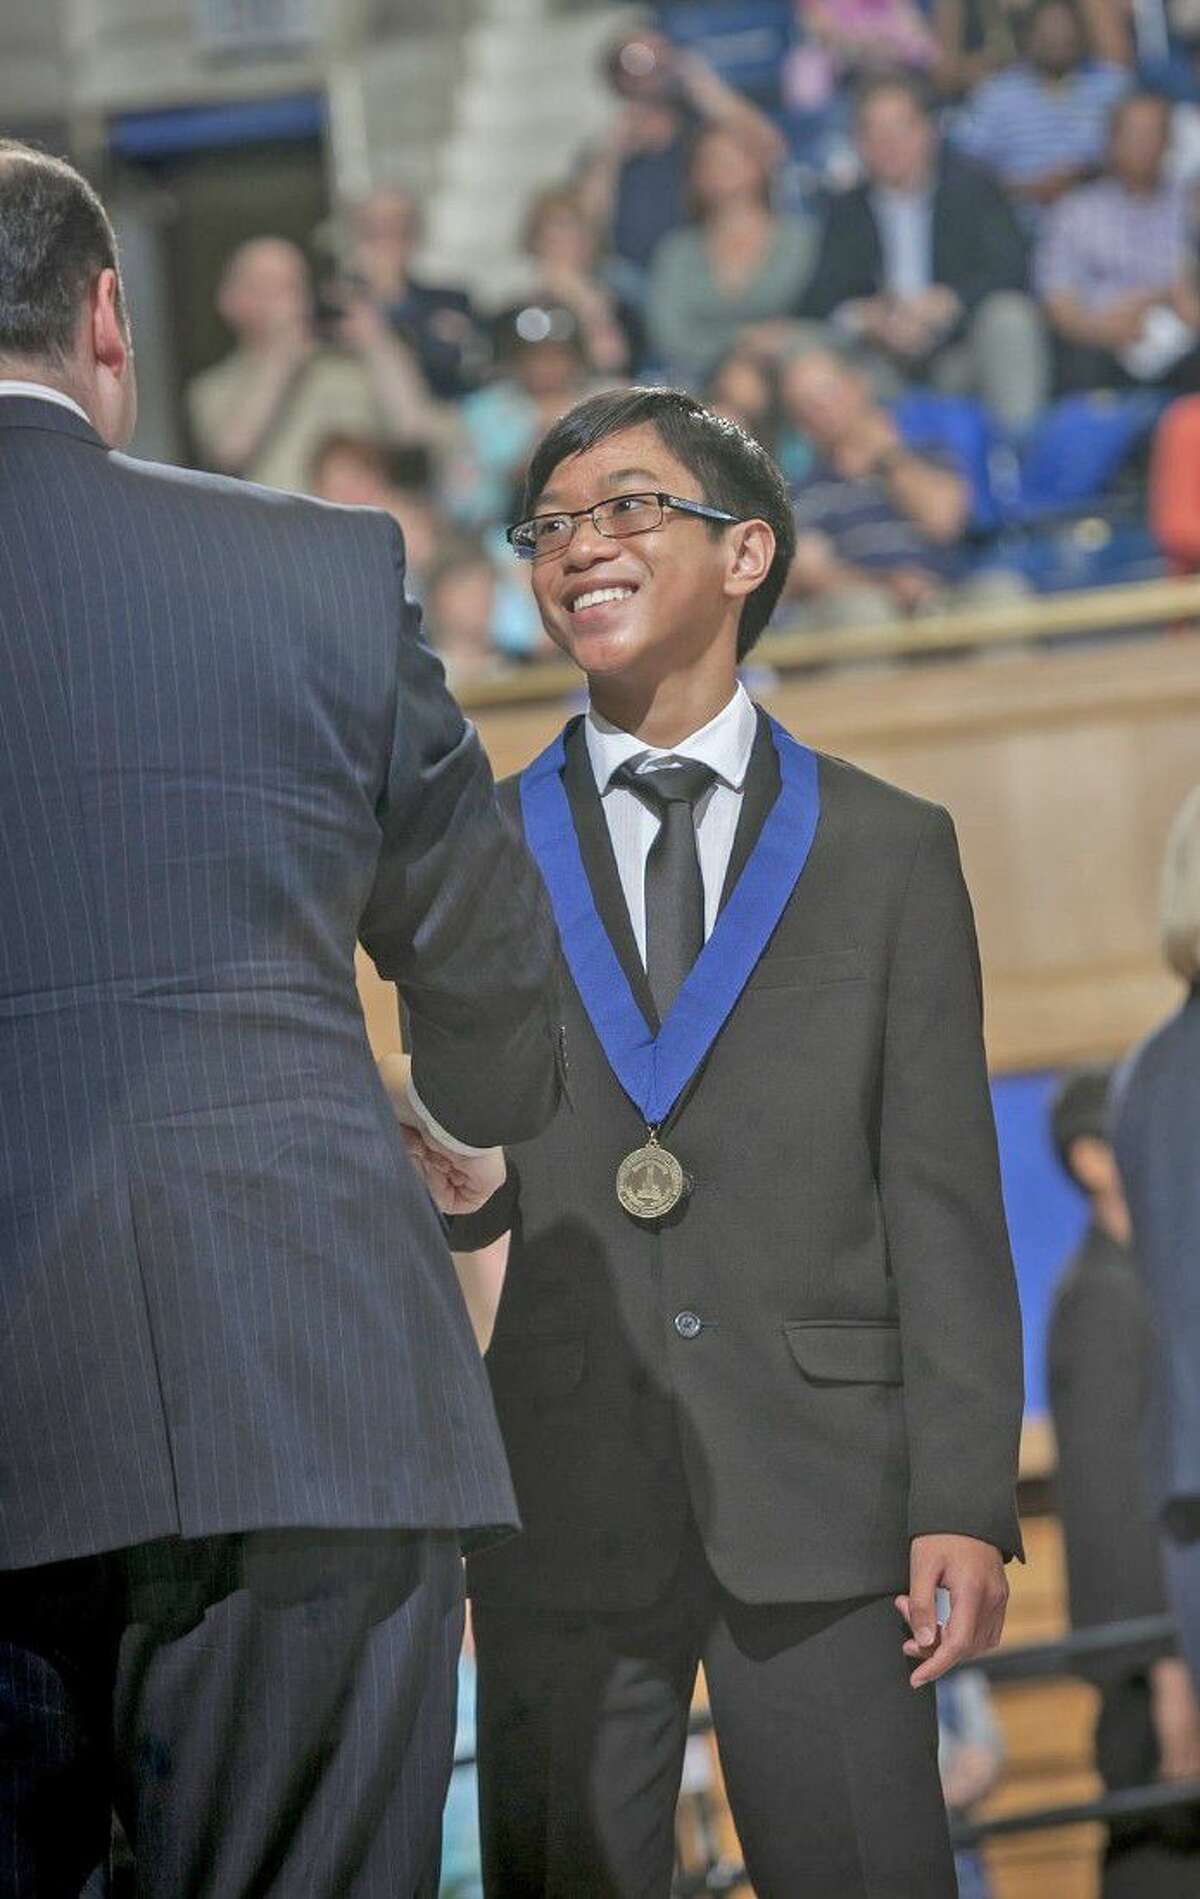 Gabriel Bolanos, incoming eighth-grade student at Aragon Middle School, is honored at the Duke TIP 7th Grade Talent Search 2016 Grand Ceremony, held May 16 at Duke’s Cameron Indoor Stadium. Bolanos was one of 18 CFISD seventh-grade students recognized.